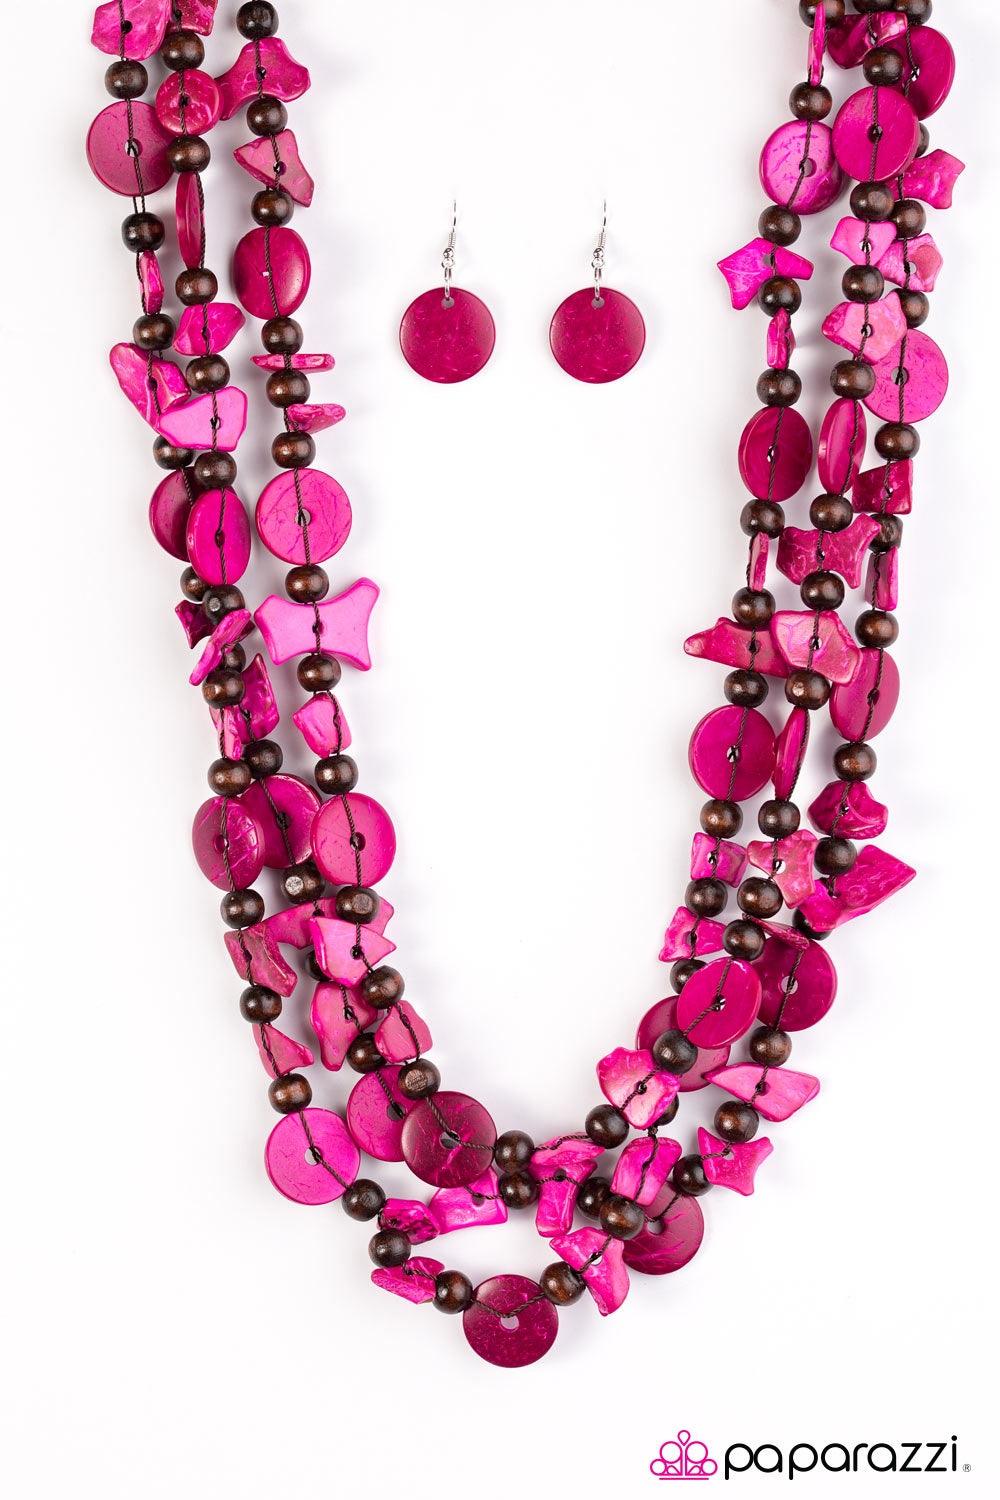 Paparazzi Accessories Living The Tropical Life - Pink Tinted in vivacious pink hues, bits of wooden beads and discs join earthy wooden beads along an elongated strand of thread. Try double-wrapping or even triple-wrapping around the neck for a colorfully